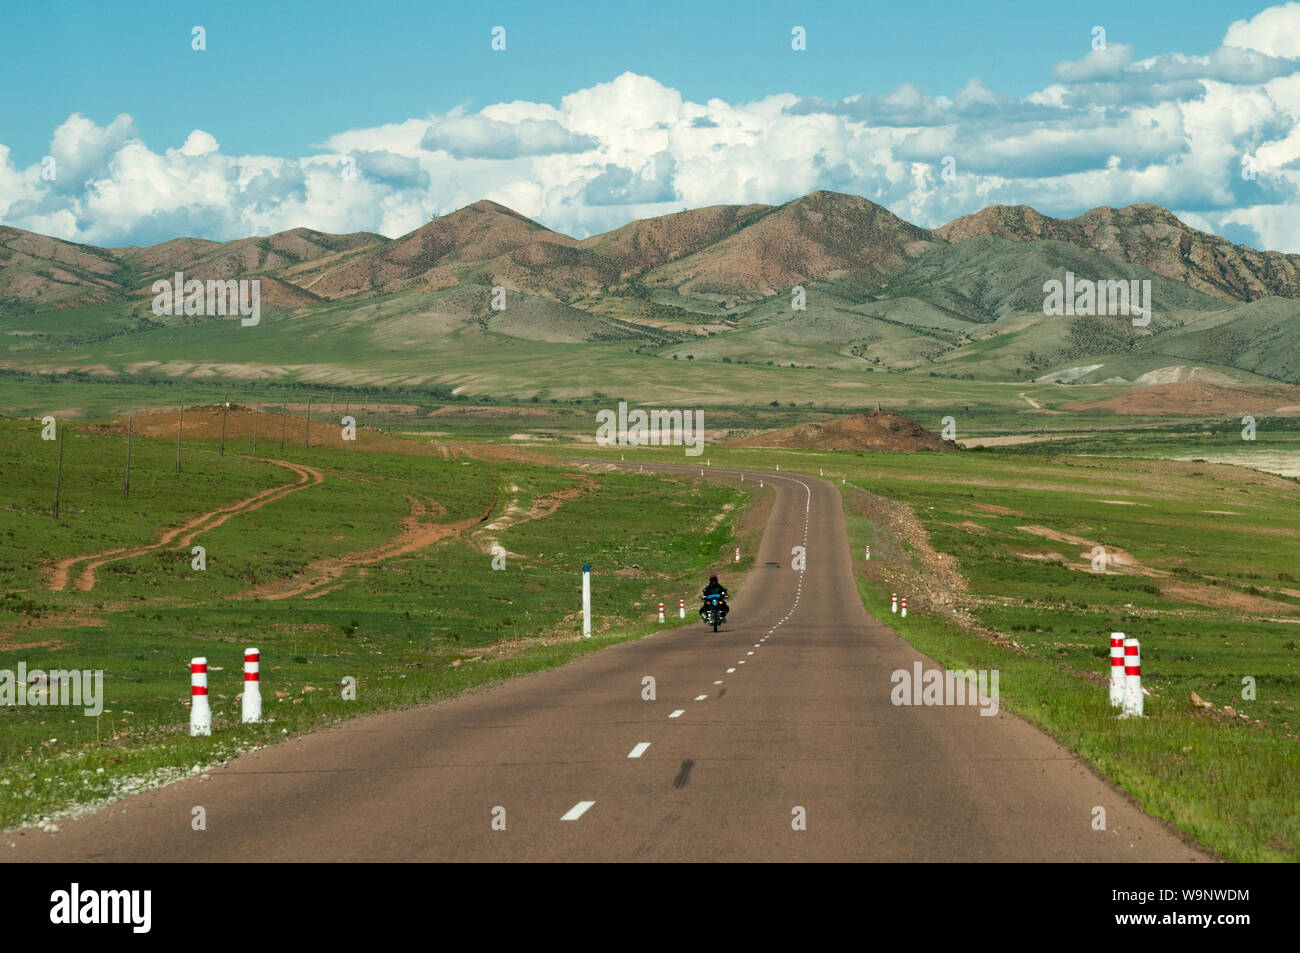 On the road, northern Mongolia Stock Photo